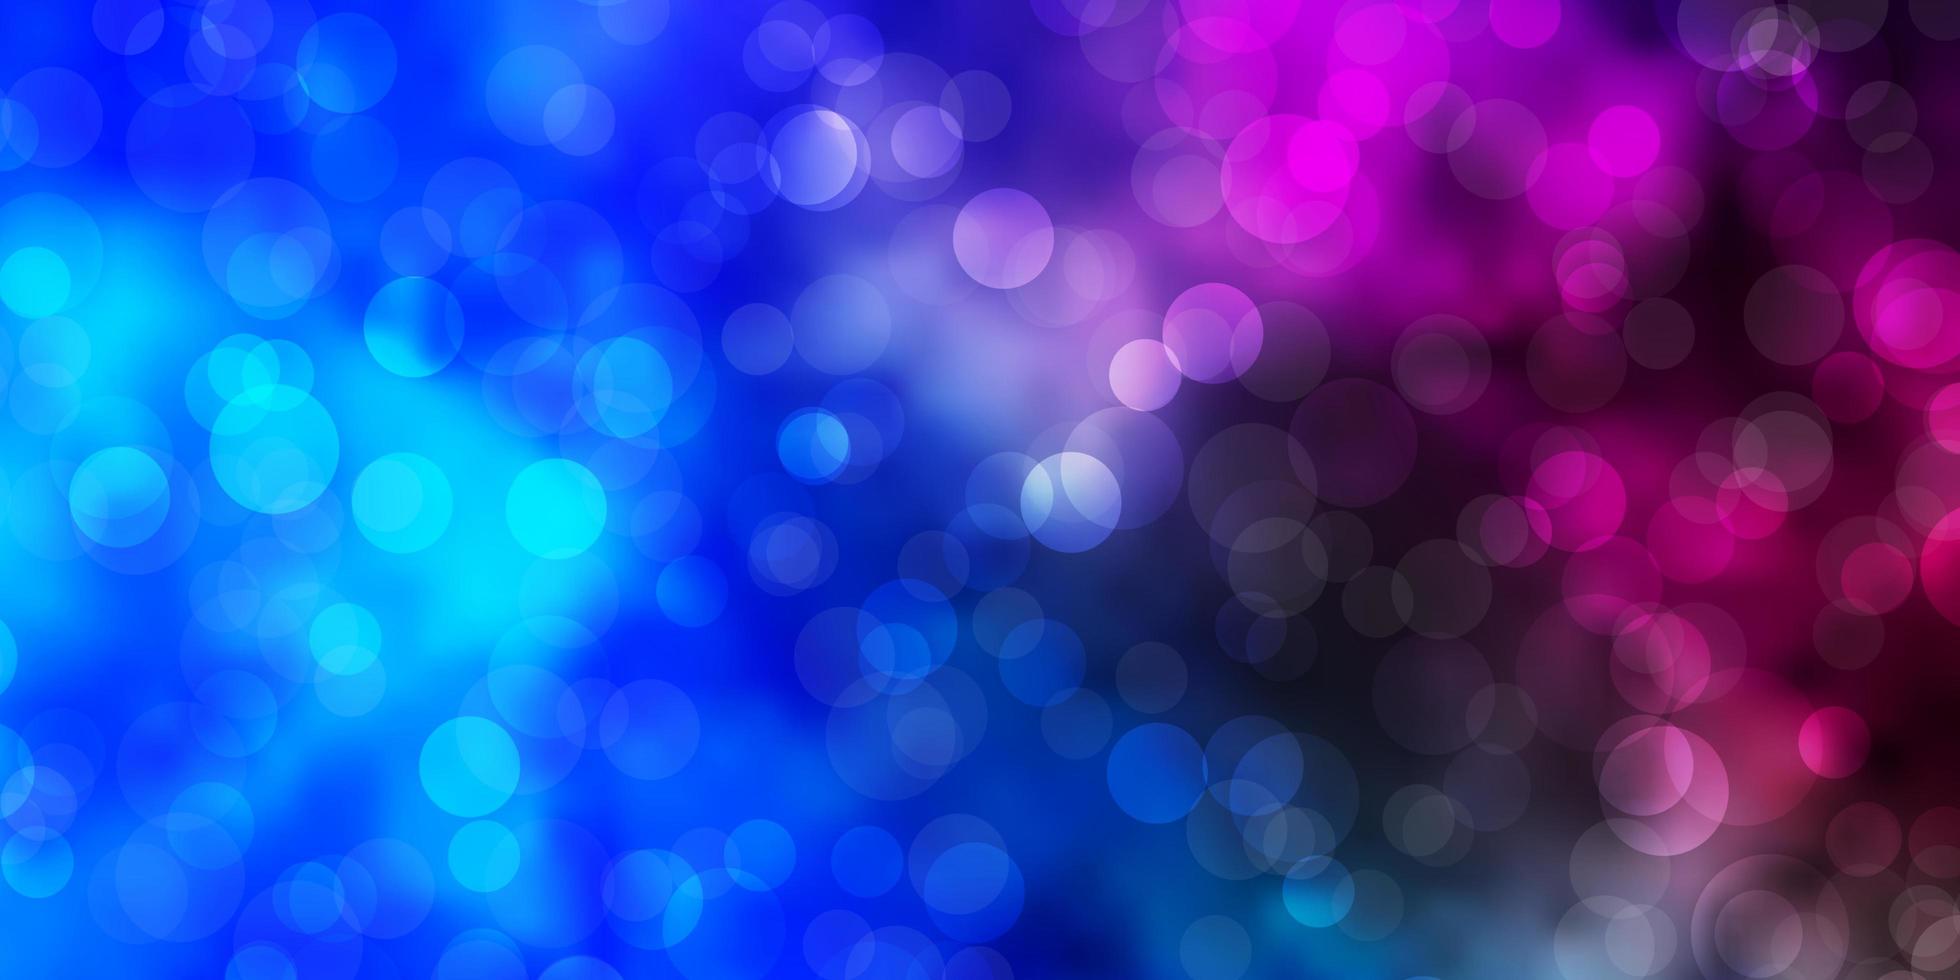 Dark Pink, Blue vector texture with circles.